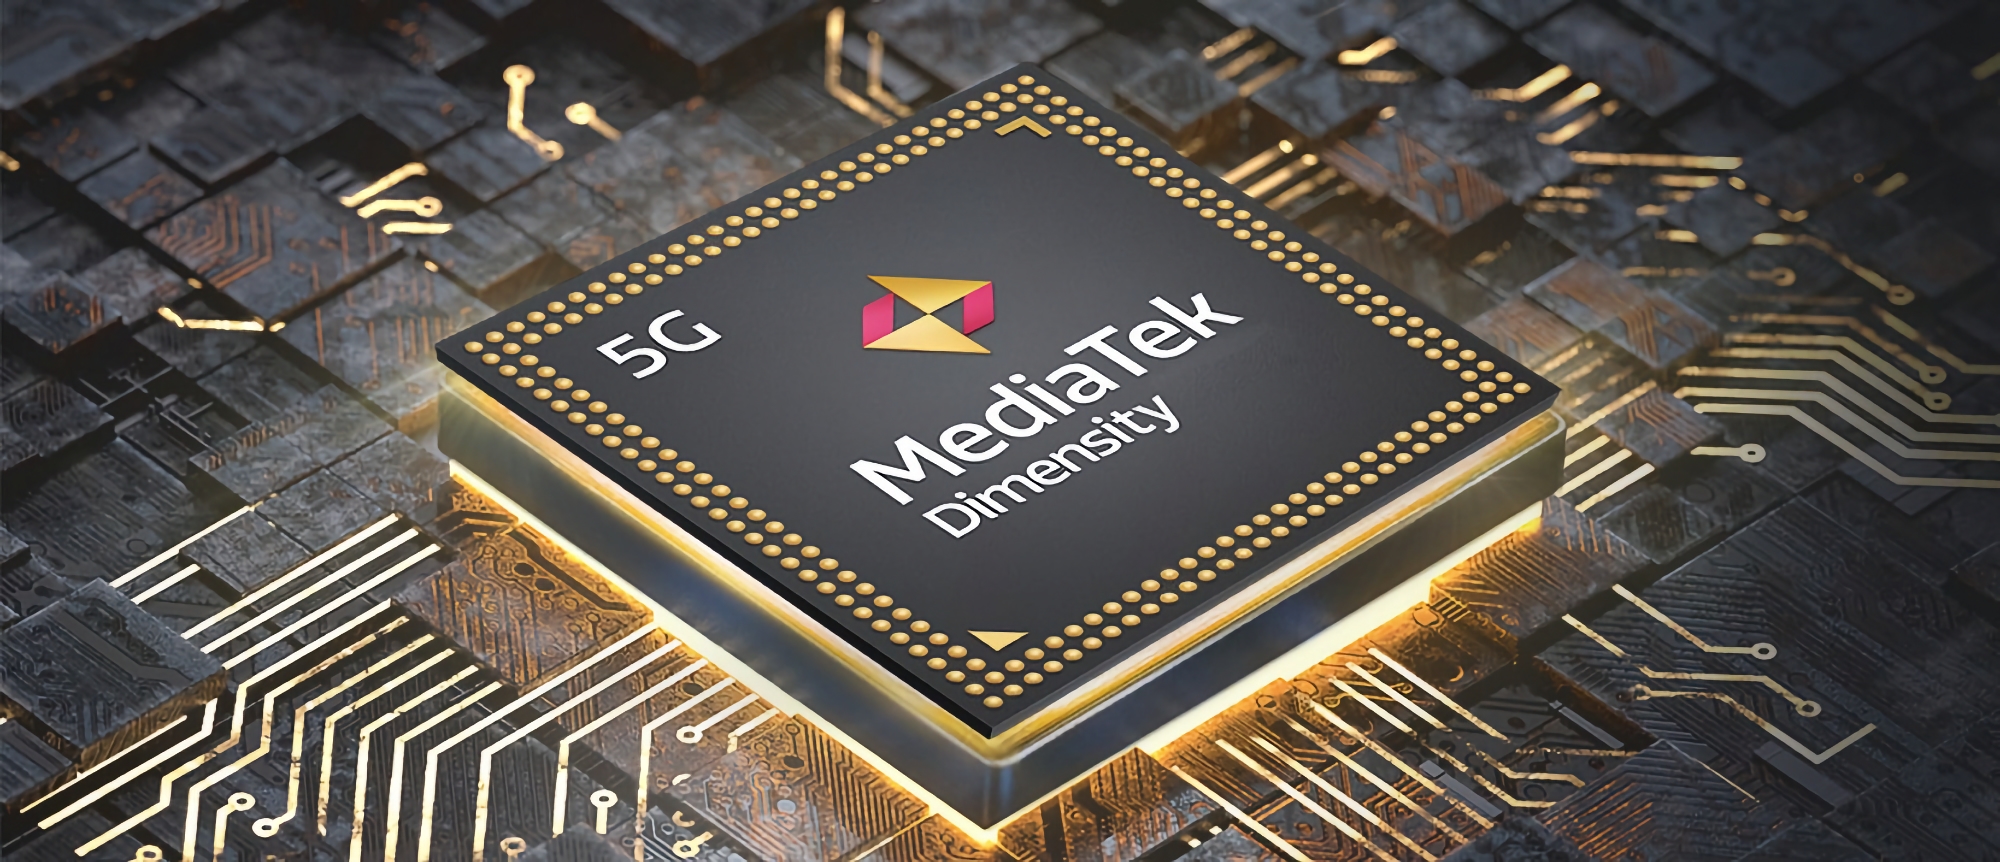 Snapdragon 8 Gen 2 and Apple's A16 Bionic competitor: MediaTek will unveil new flagship Dimensity 9200 processor at Nov. 8 presentation